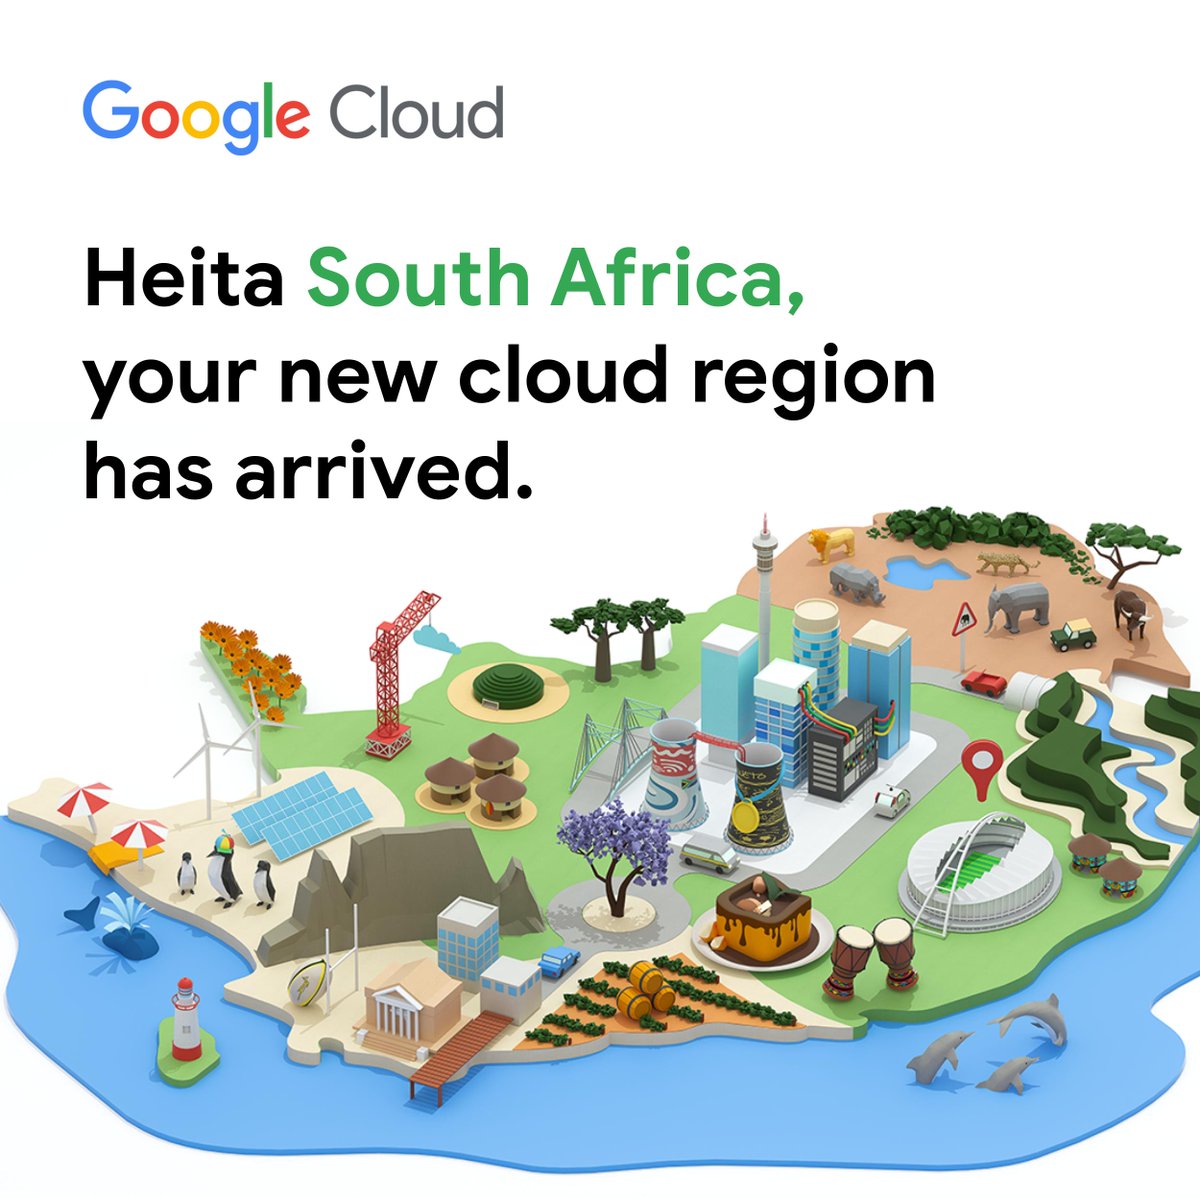 🎉 Today, we’re happy to announce the opening of the Johannesburg region in South Africa 🇿🇦 - our first Google Cloud region in Africa! #CloudforSouthAfrica #GoogleCloud #Africa #SouthAfrica